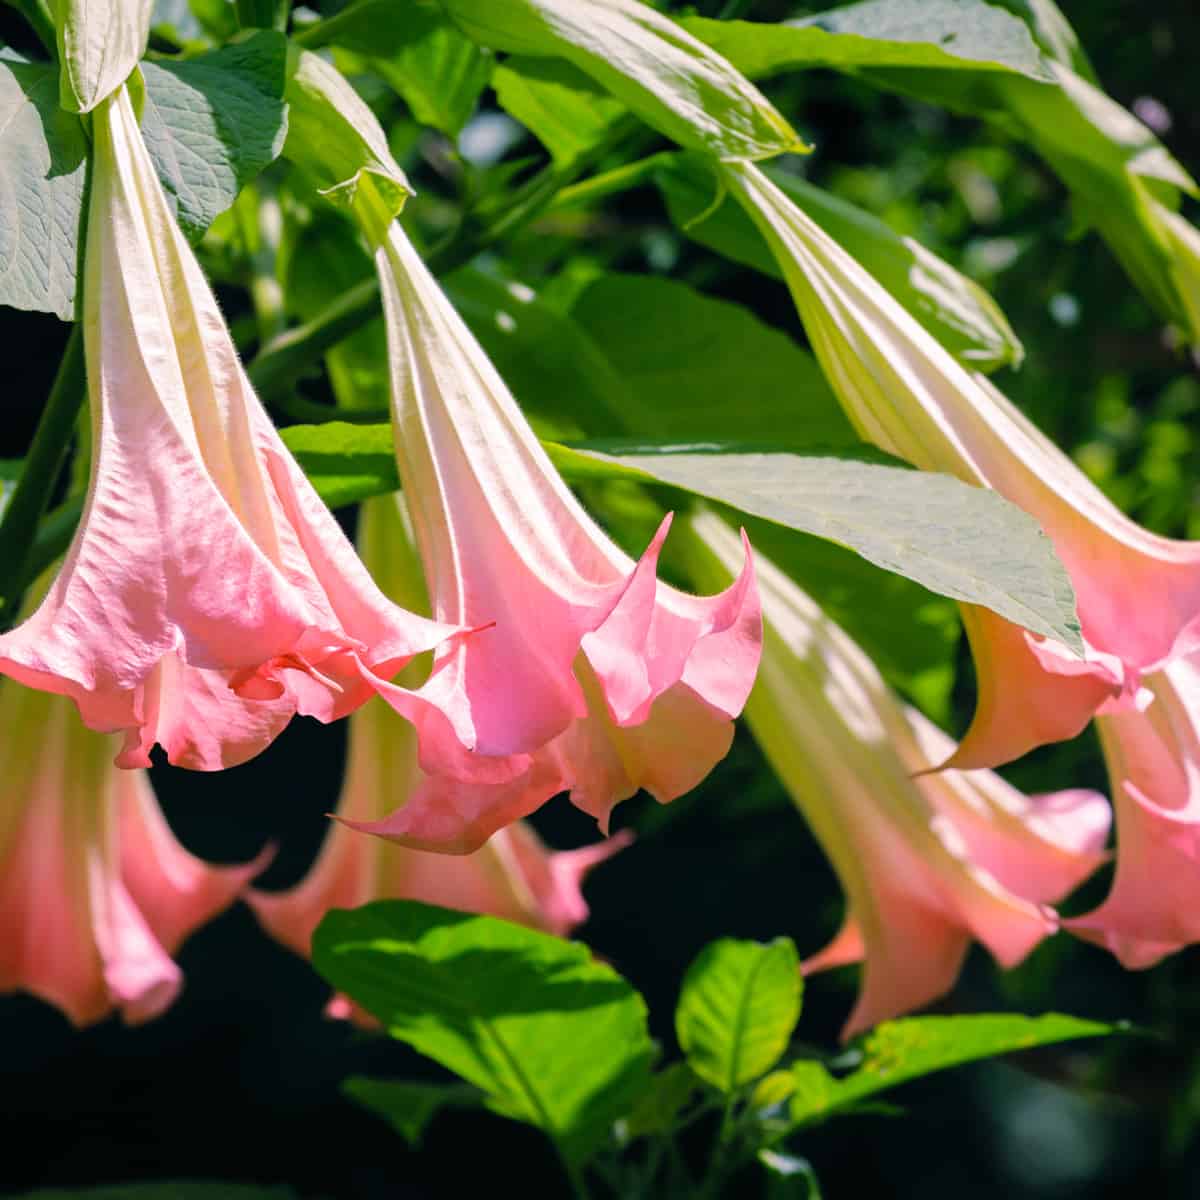 angel's trumpet releases its scent at night